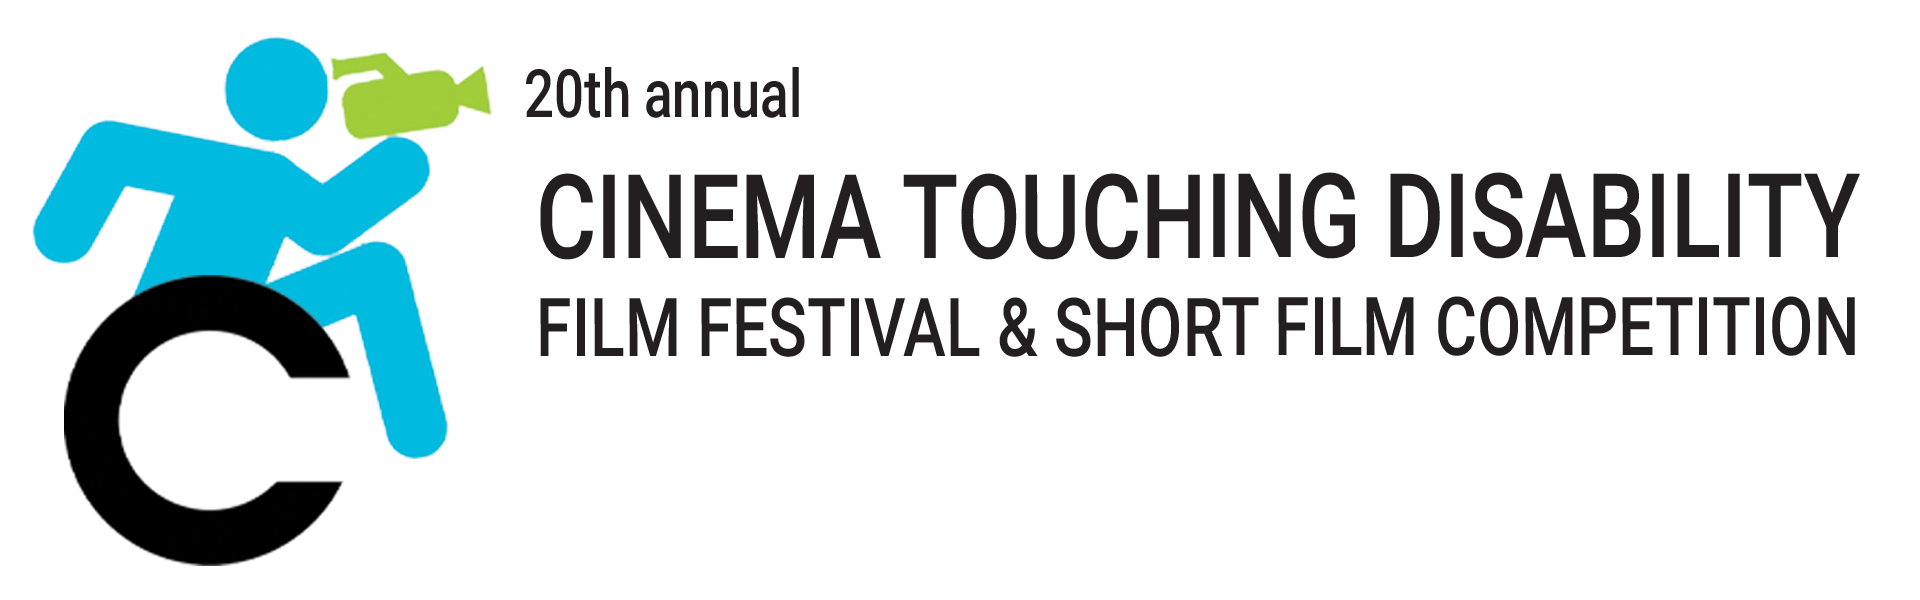 20th annual Cinema Touching Disability Film Festival & Short Film Competition